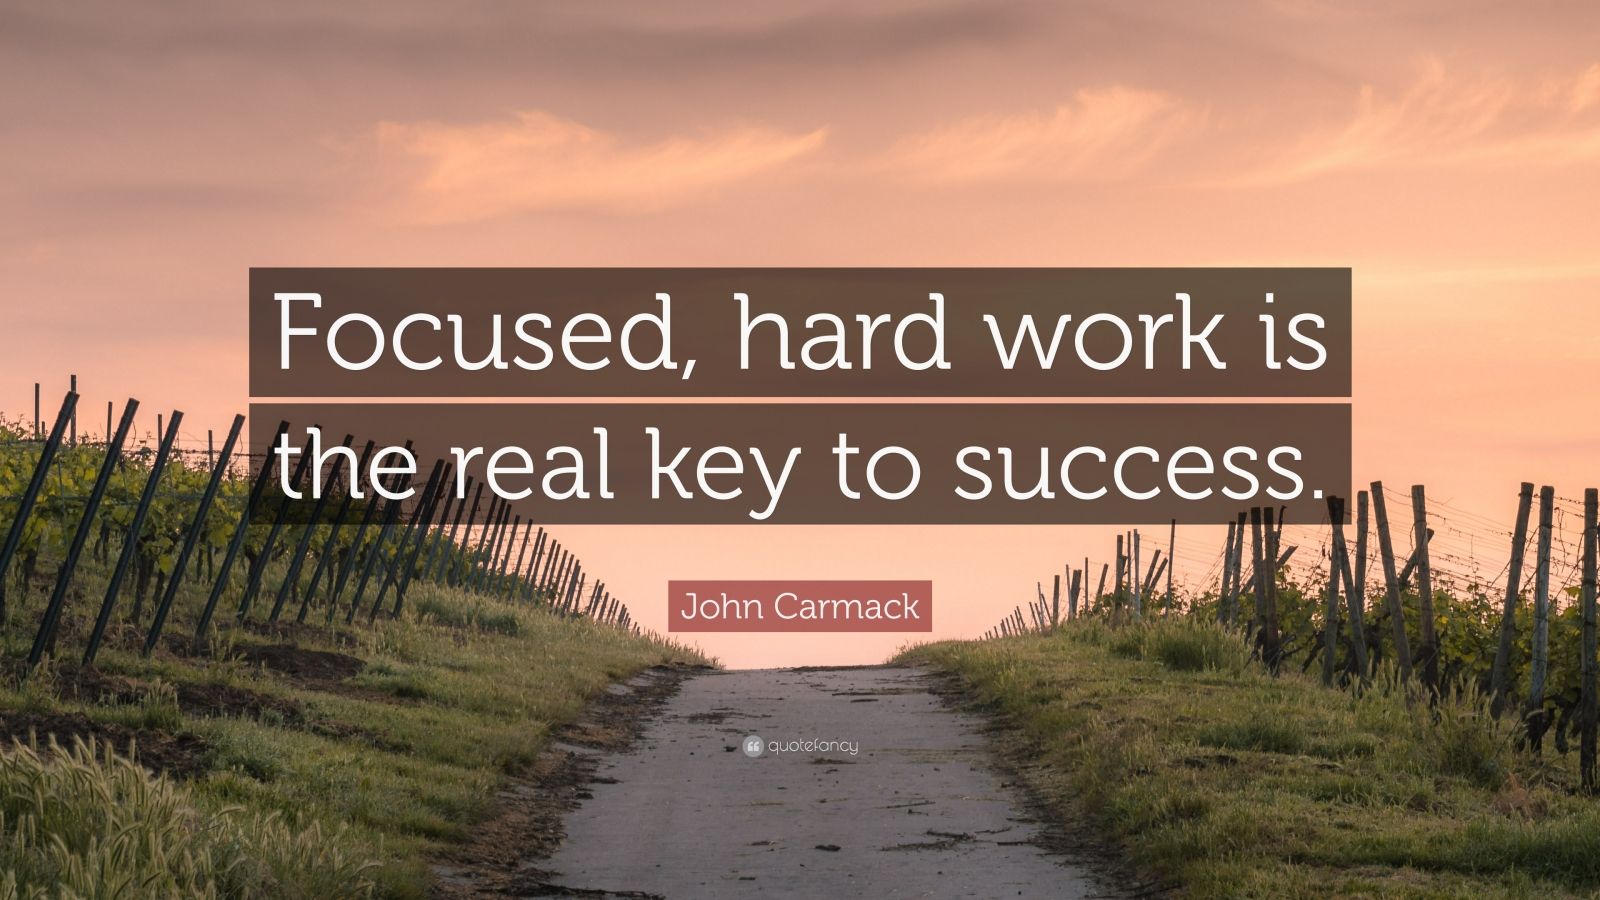 John Carmack Quote: “Focused, hard work is the real key to success ...